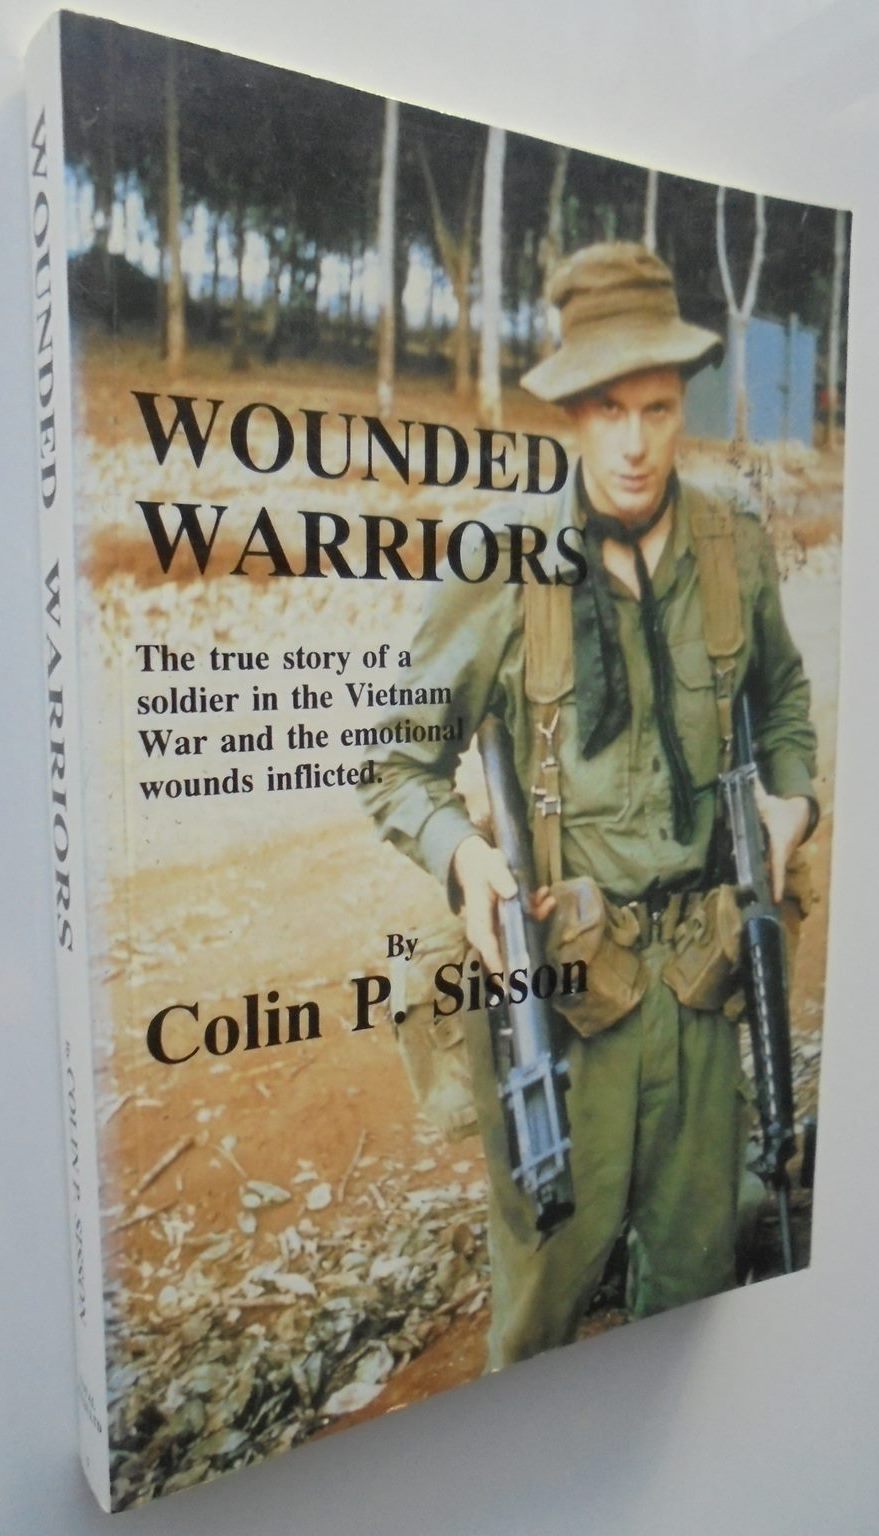 Wounded warriors : the true story of a soldier in the Vietnam War and of the emotional wounds inflicted. by Colin P. Sisson.